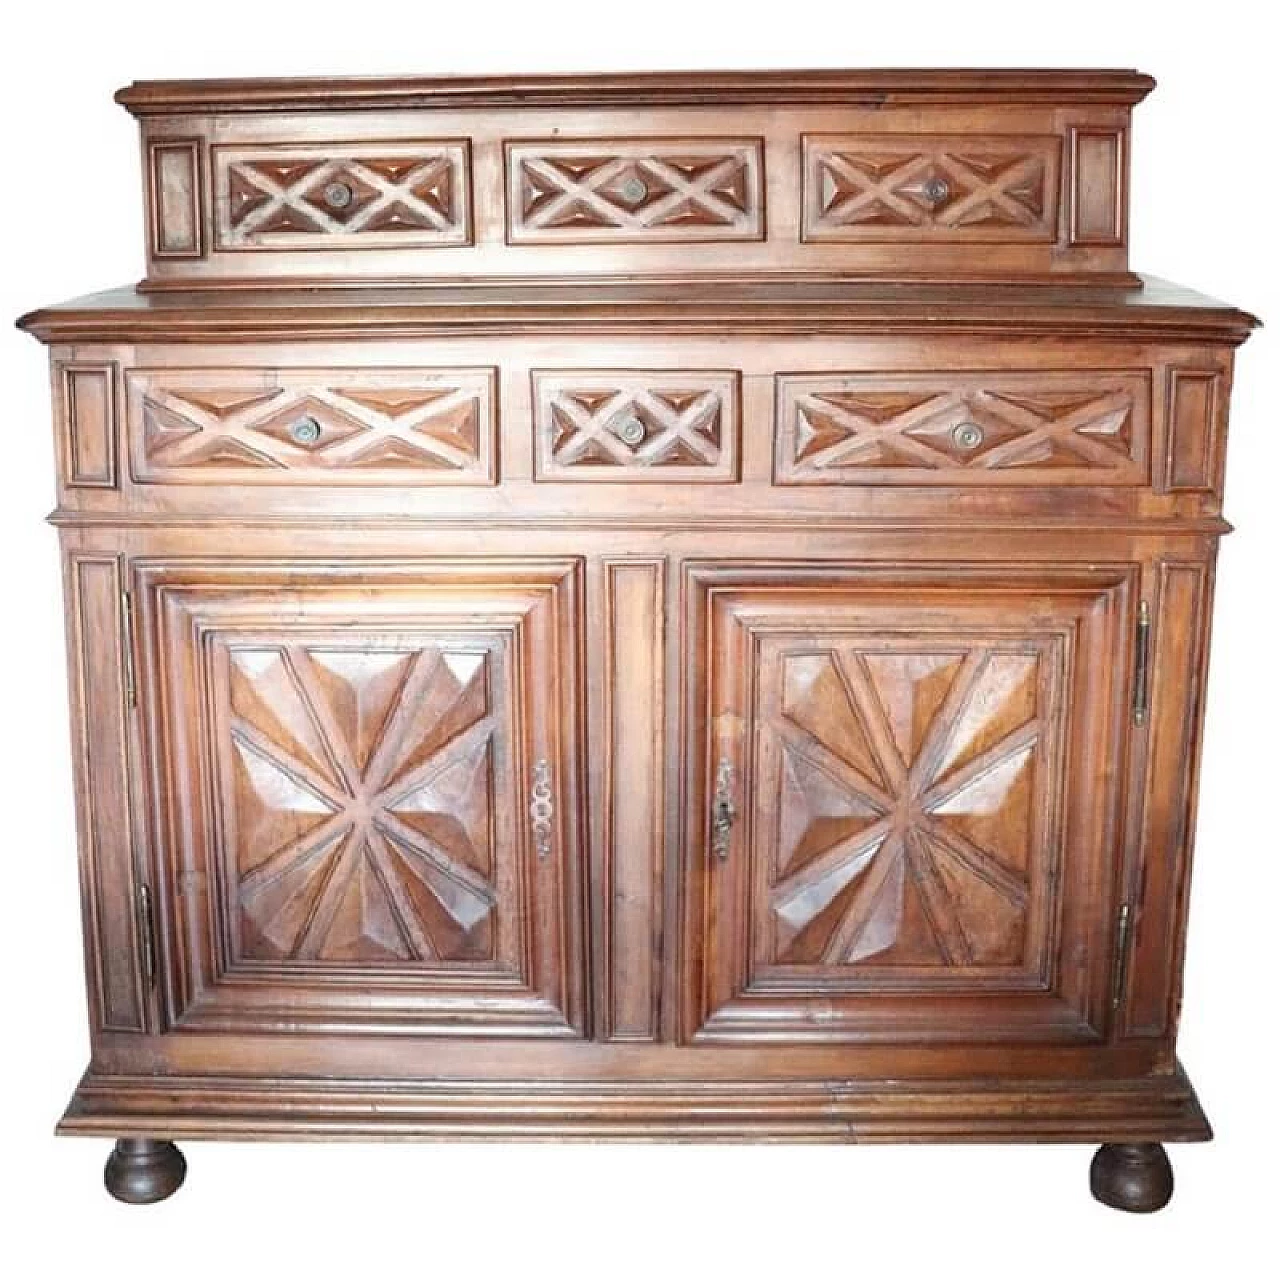 Ancient walnut sideboard of the high Piedmontese Baroque period, 17th century 1074487